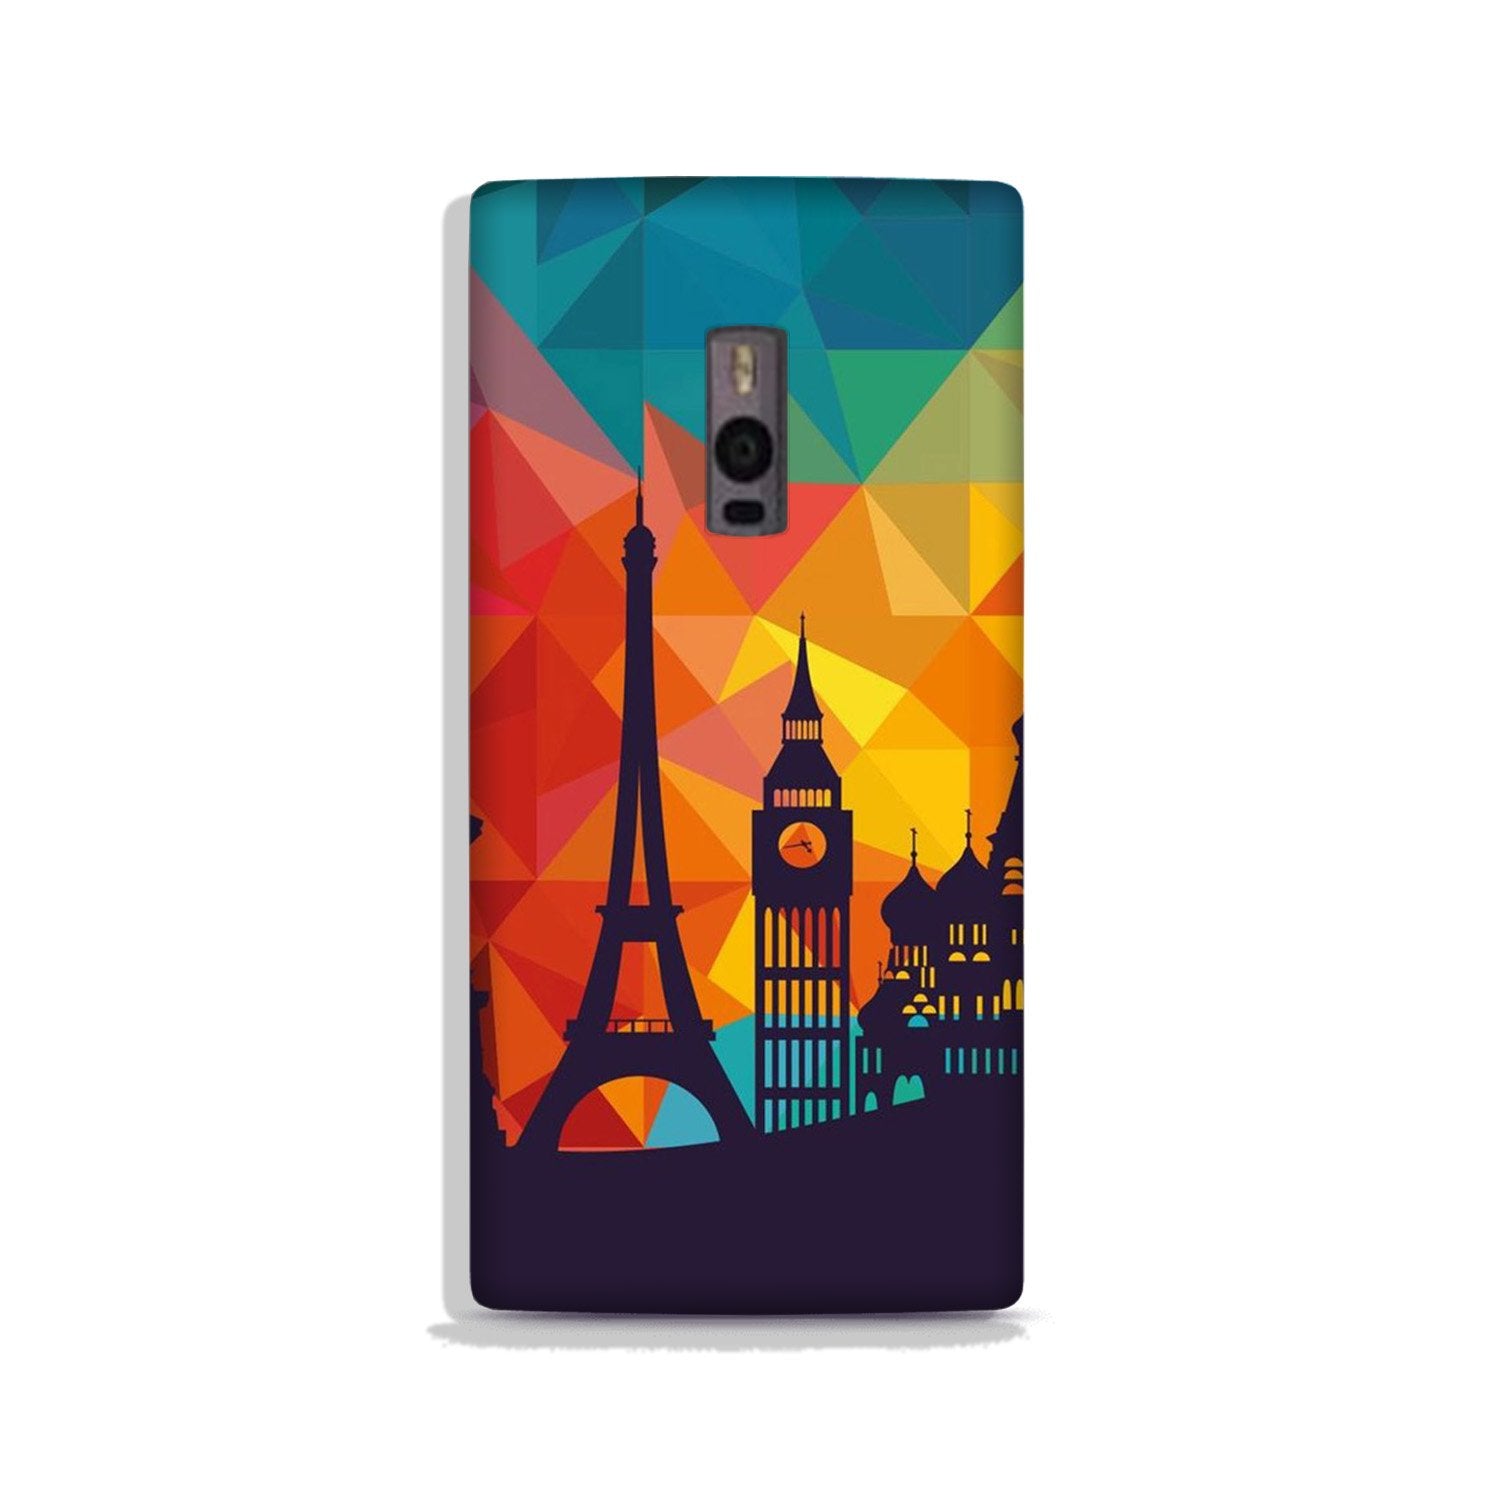 Eiffel Tower2 Case for OnePlus 2